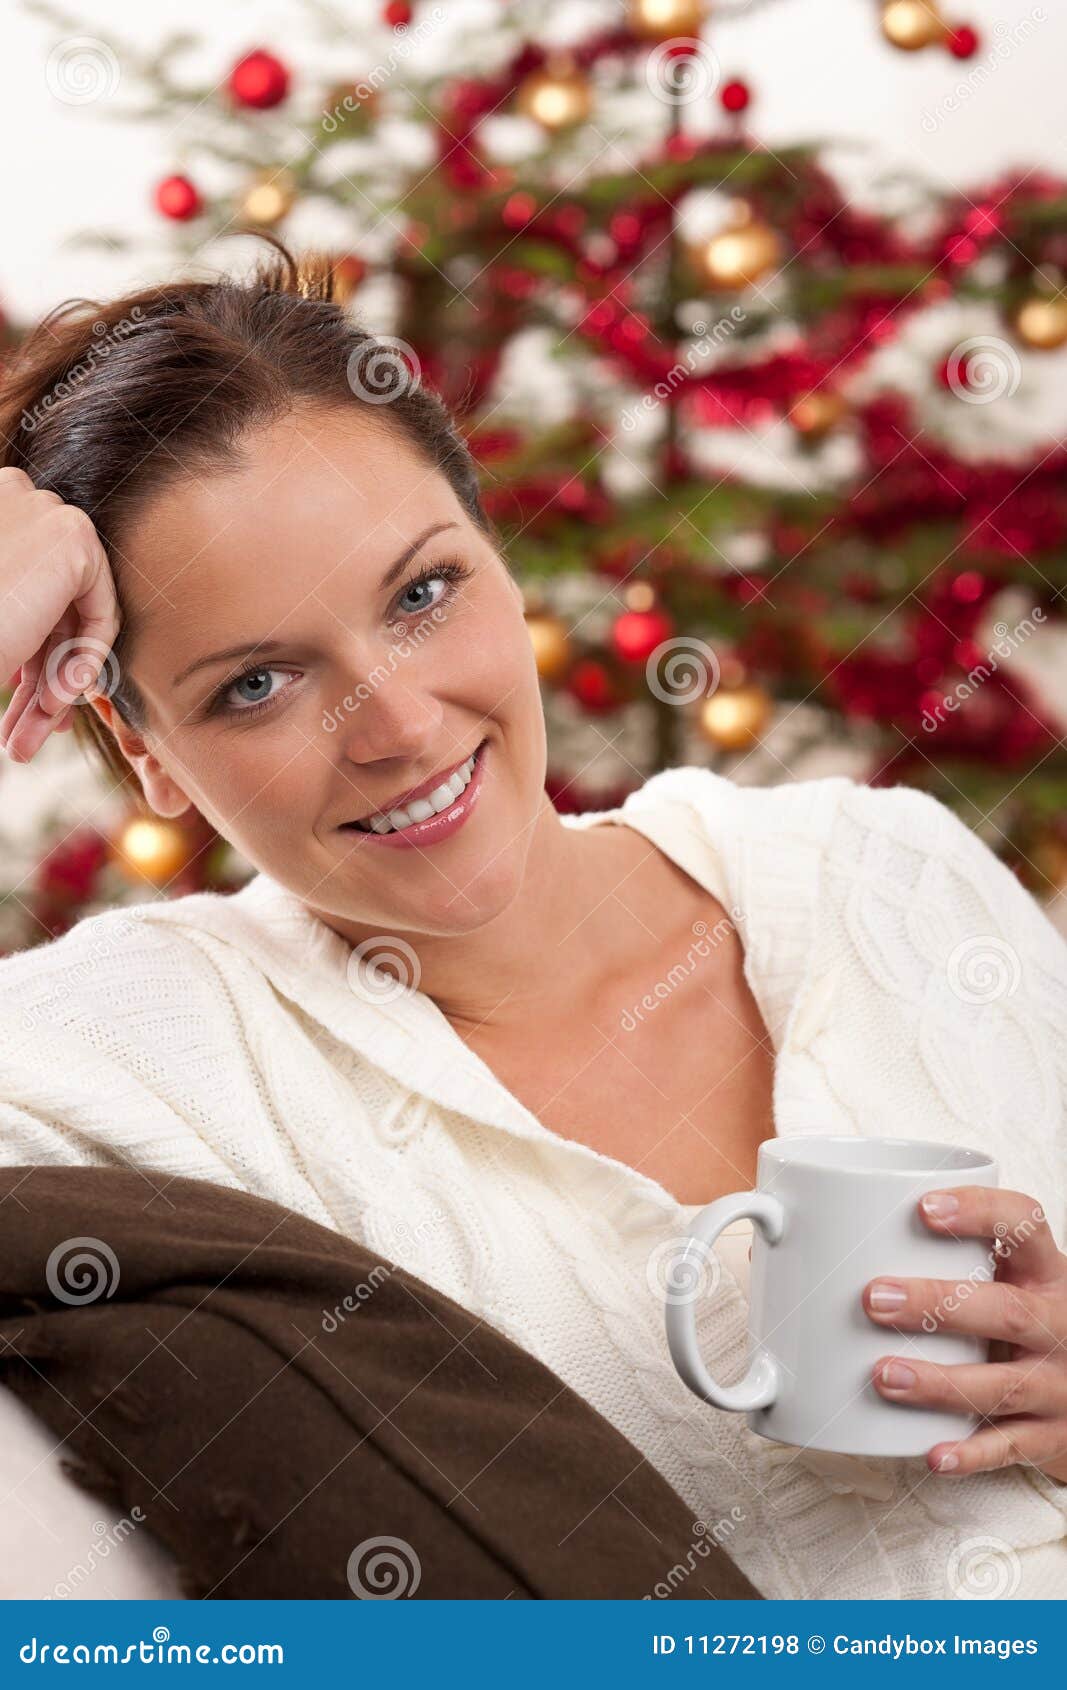 Woman Relaxing in Front of Christmas Tree Stock Photo - Image of ...